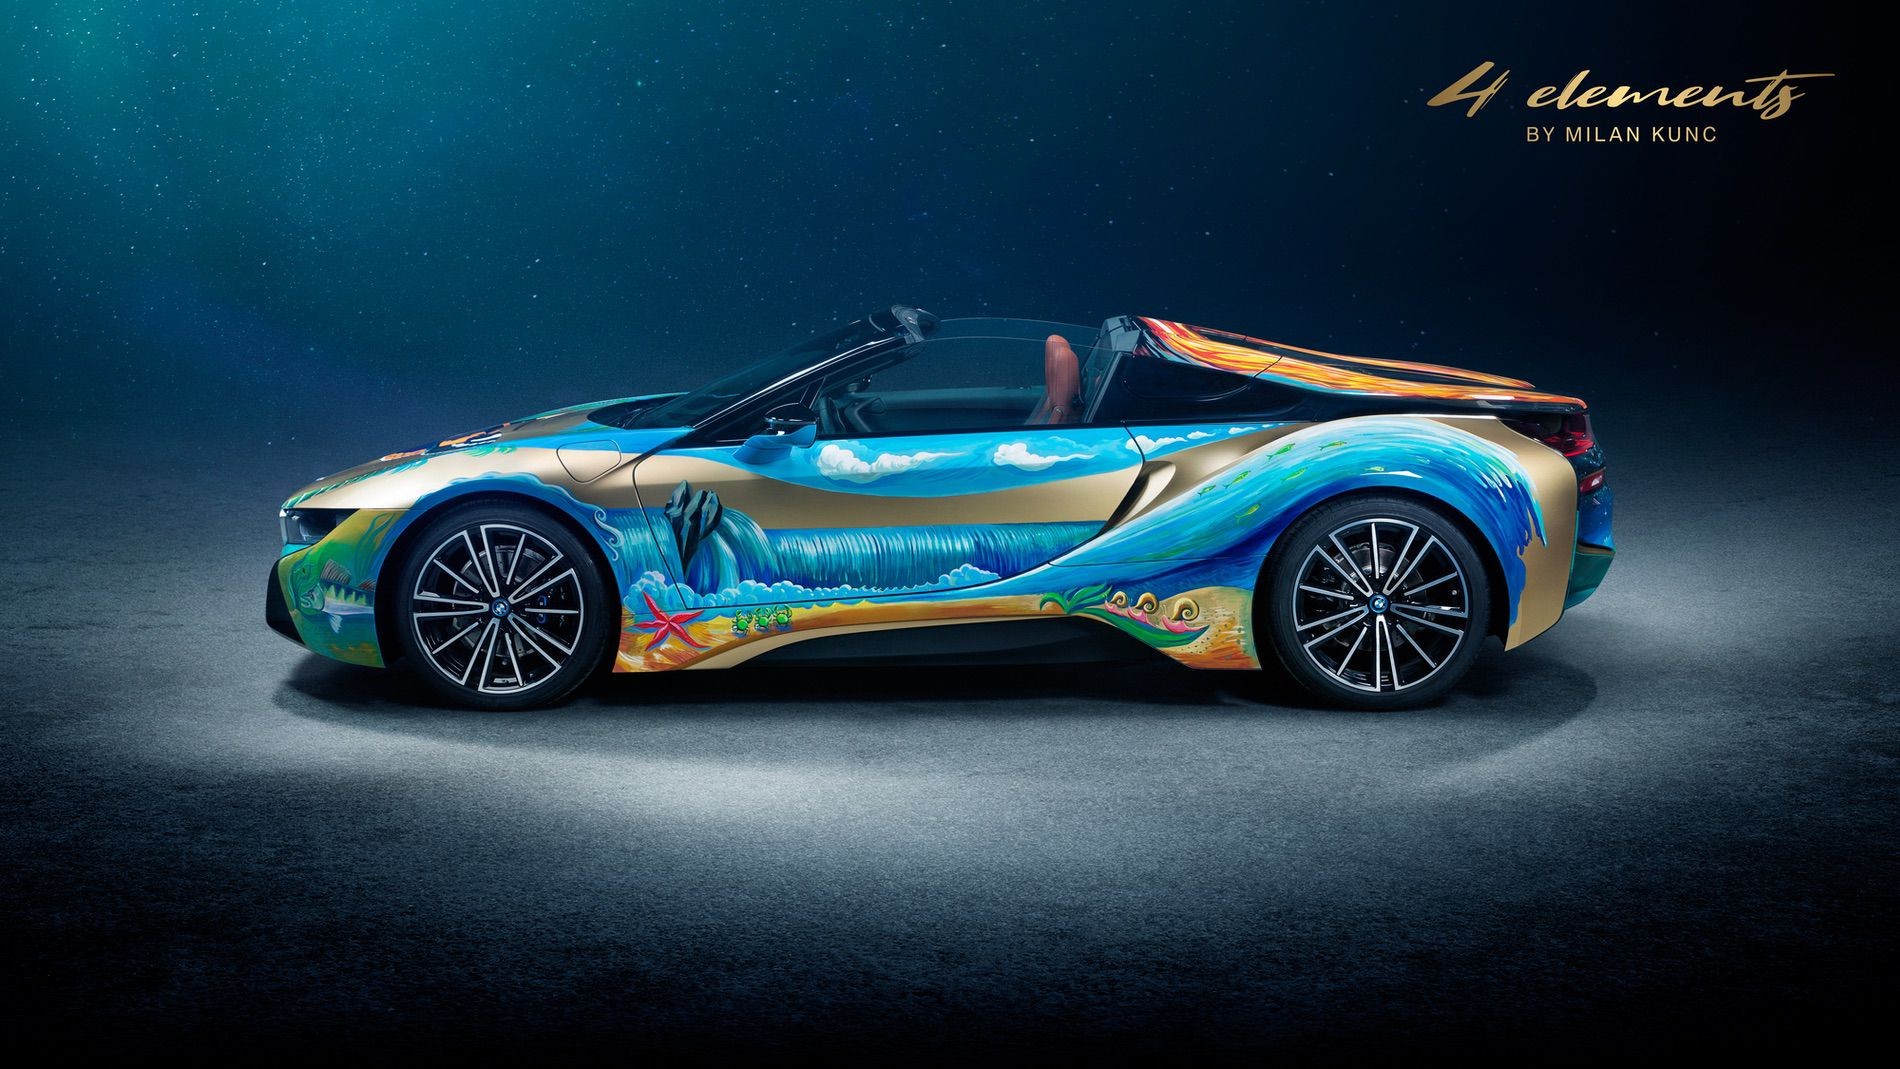 On the 2019 BMW i8 Roadster 4 Elements, German artist Milan Kunc illustrated BMW’s desire to strike a balance between automobile development and environmental sustainability.